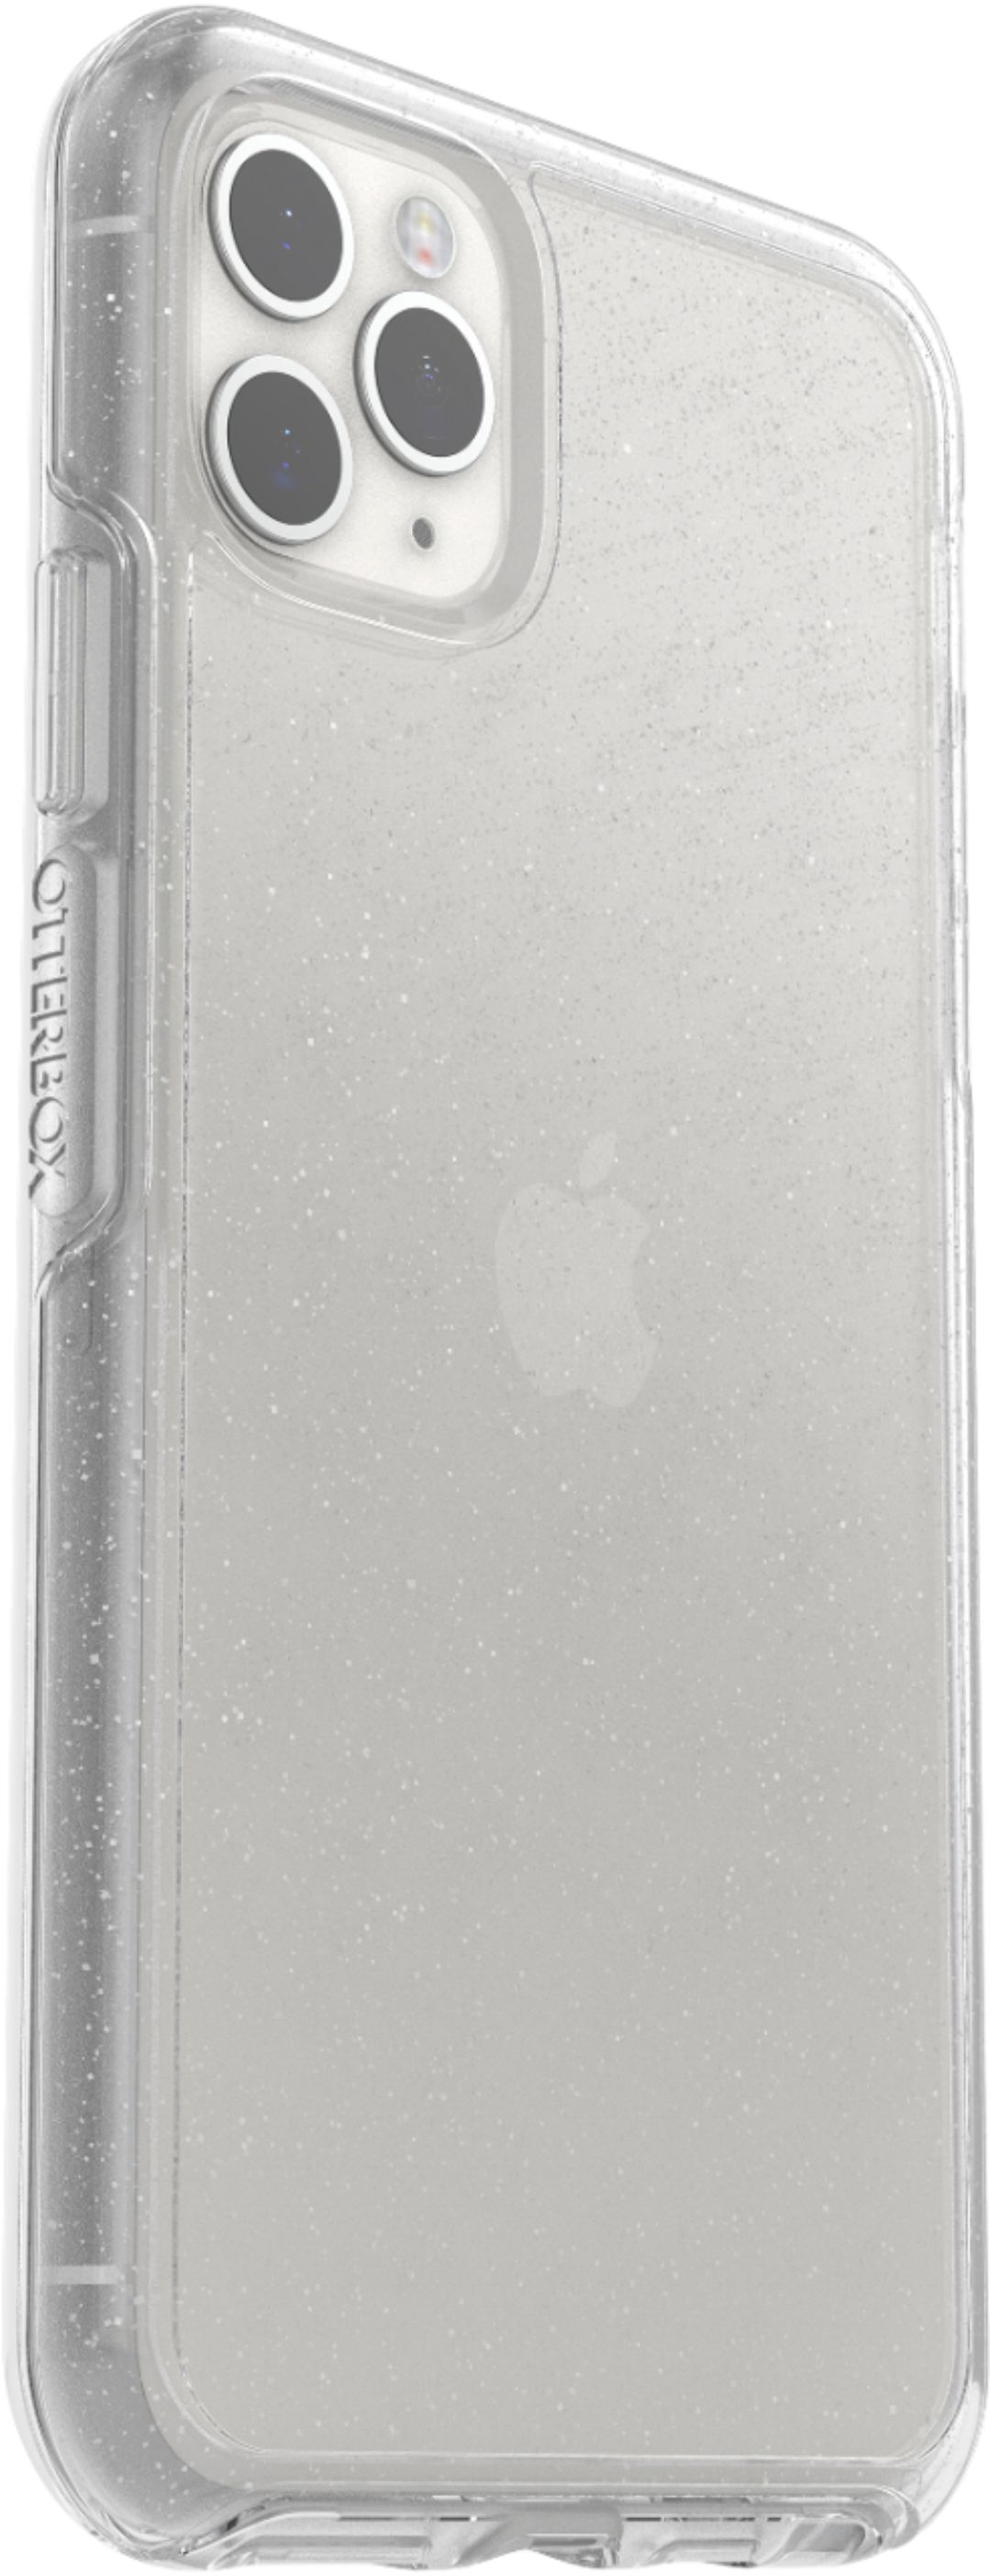 Otterbox Symmetry Series Case For Apple Iphone 11 Pro Max Xs Max Glitter 77 Best Buy